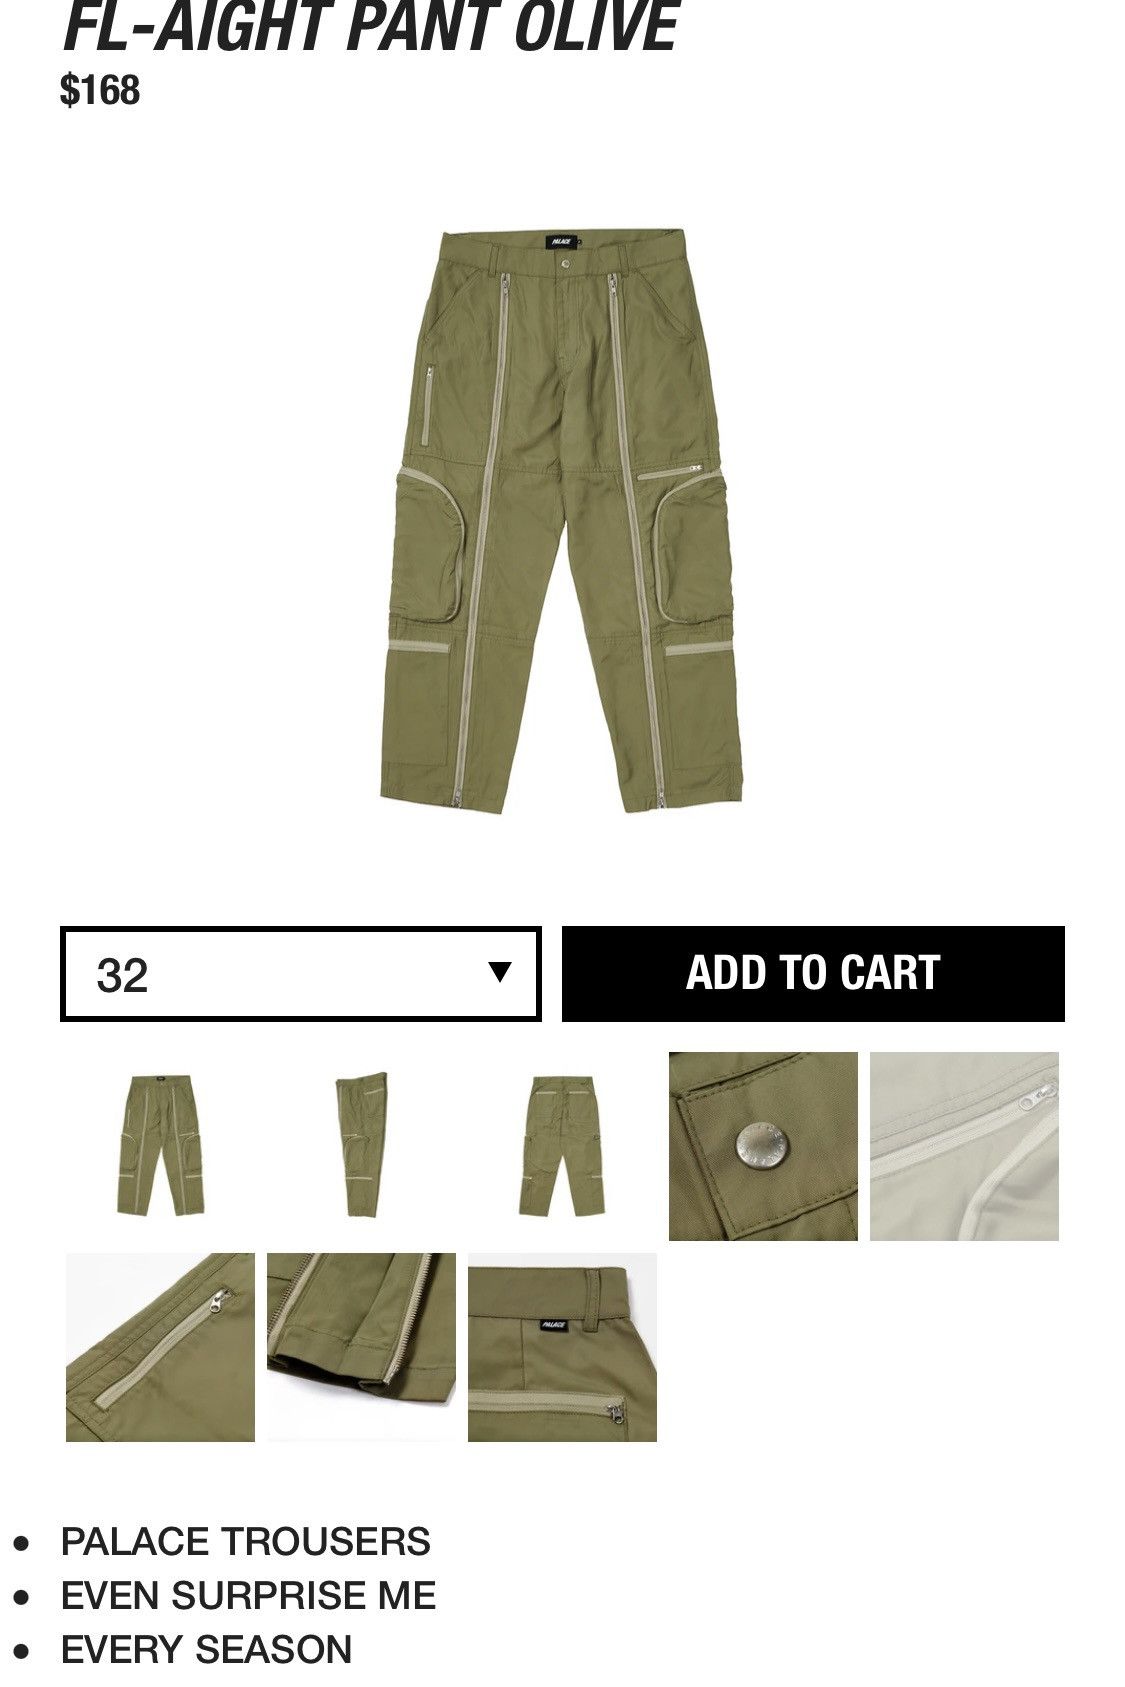 Palace Palace FL-Aight Pants olive | Grailed